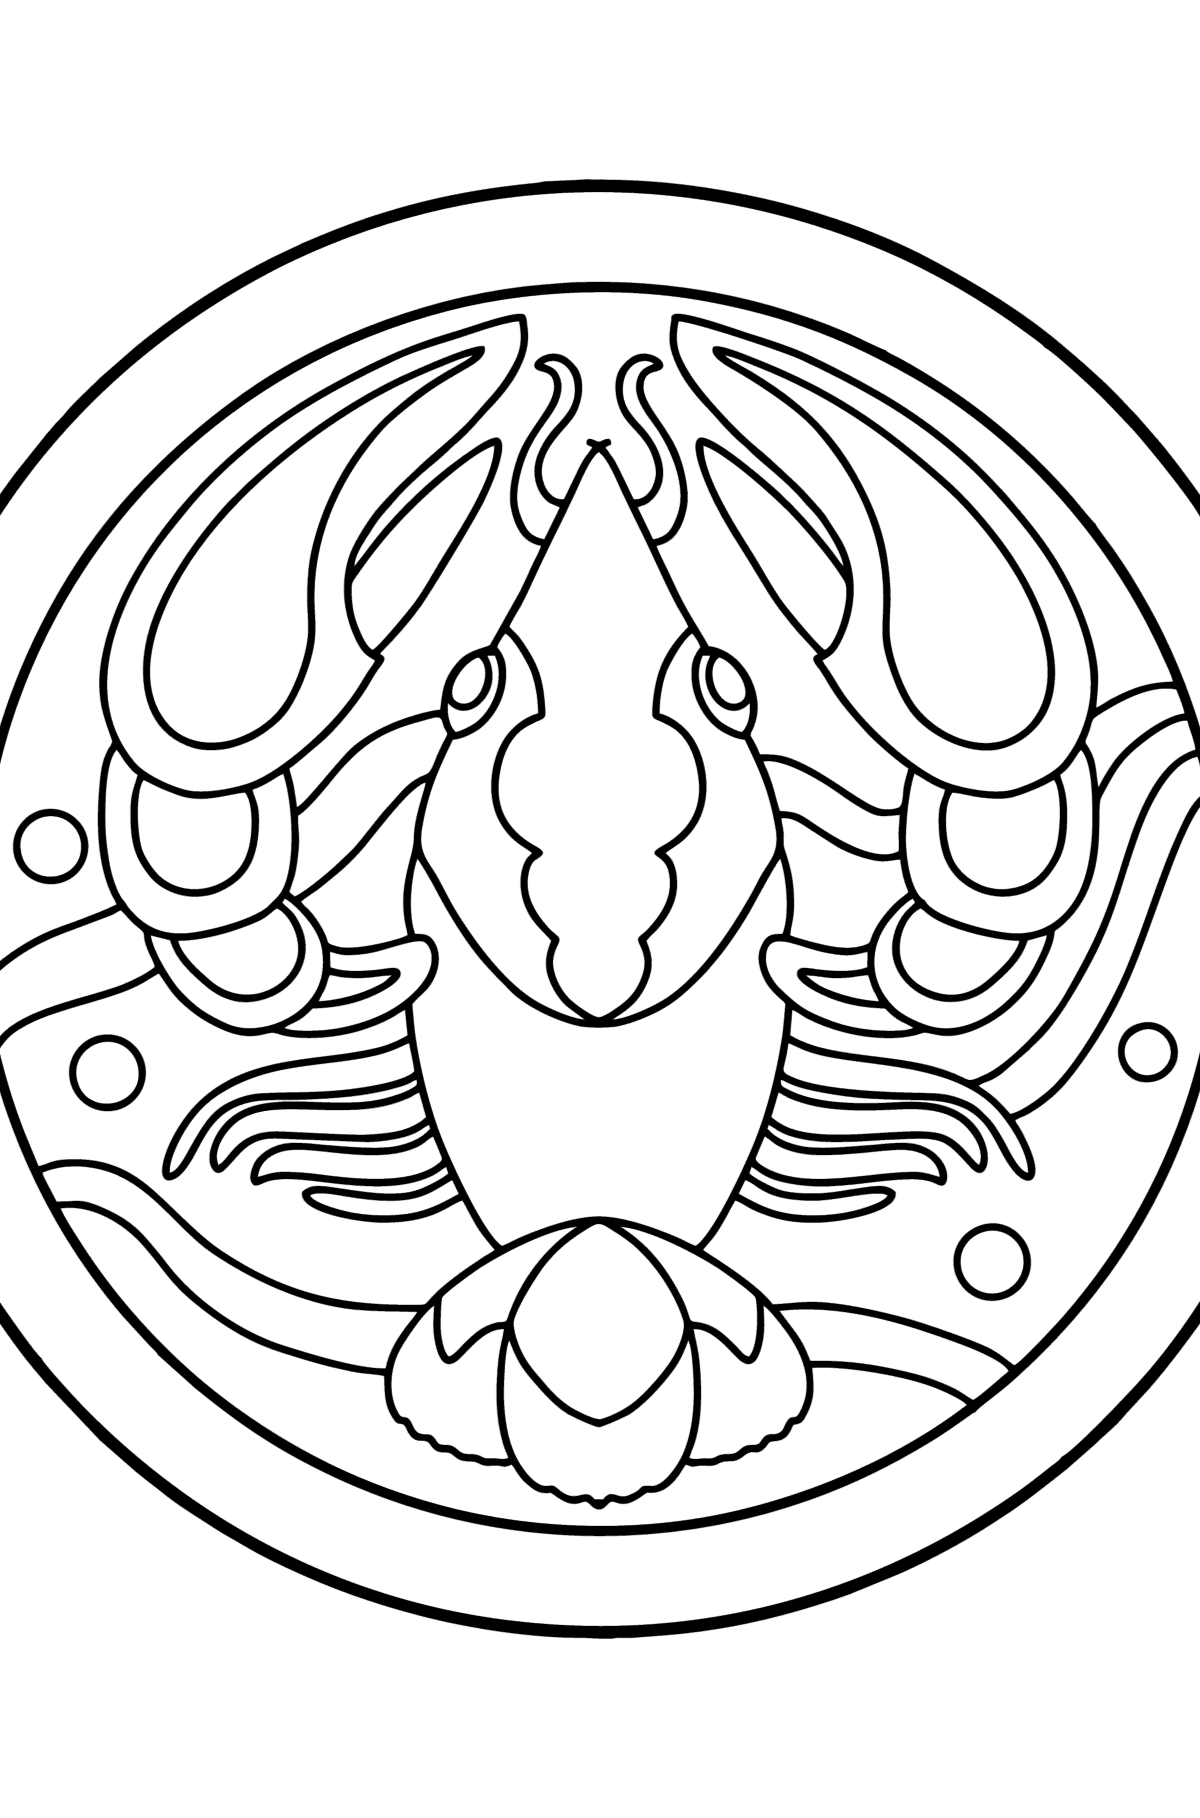 Coloring page for kids - Cancer zodiac sign - Coloring Pages for Kids